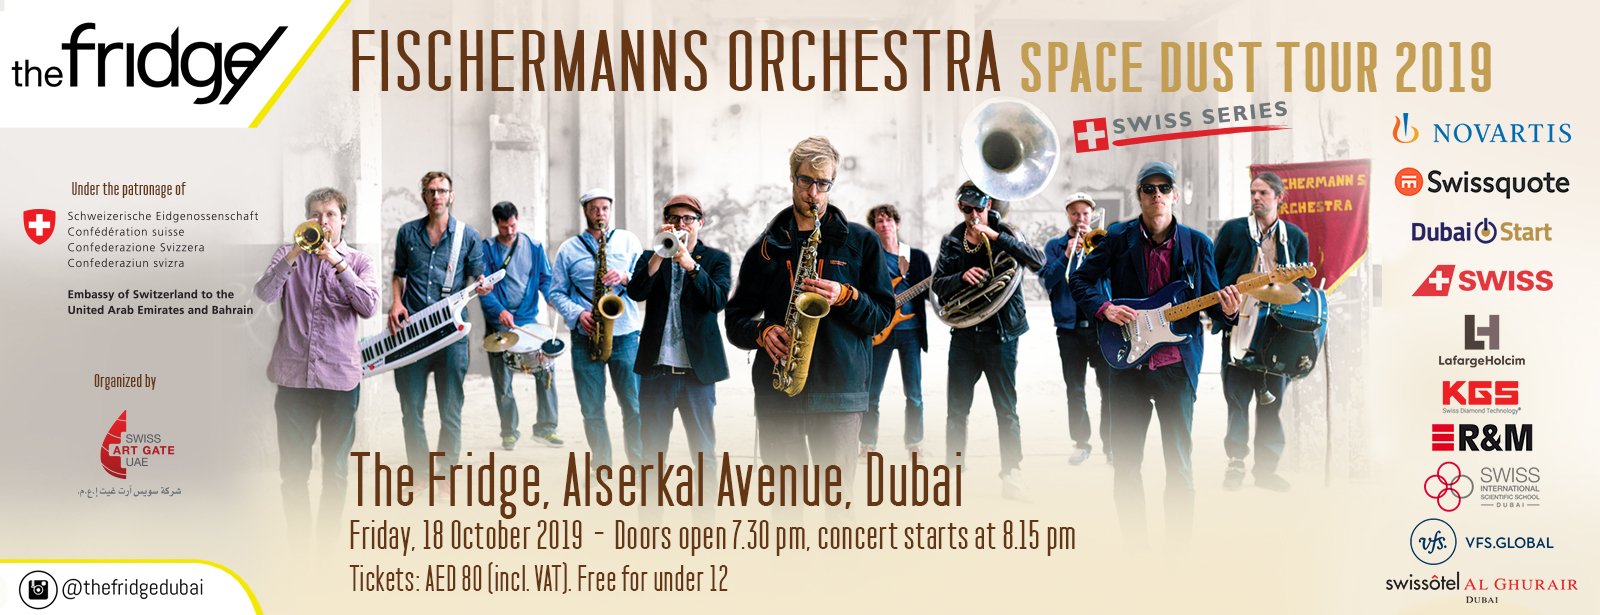 Fischermanns Orchestra at The Fridge, Dubai - Coming Soon in UAE